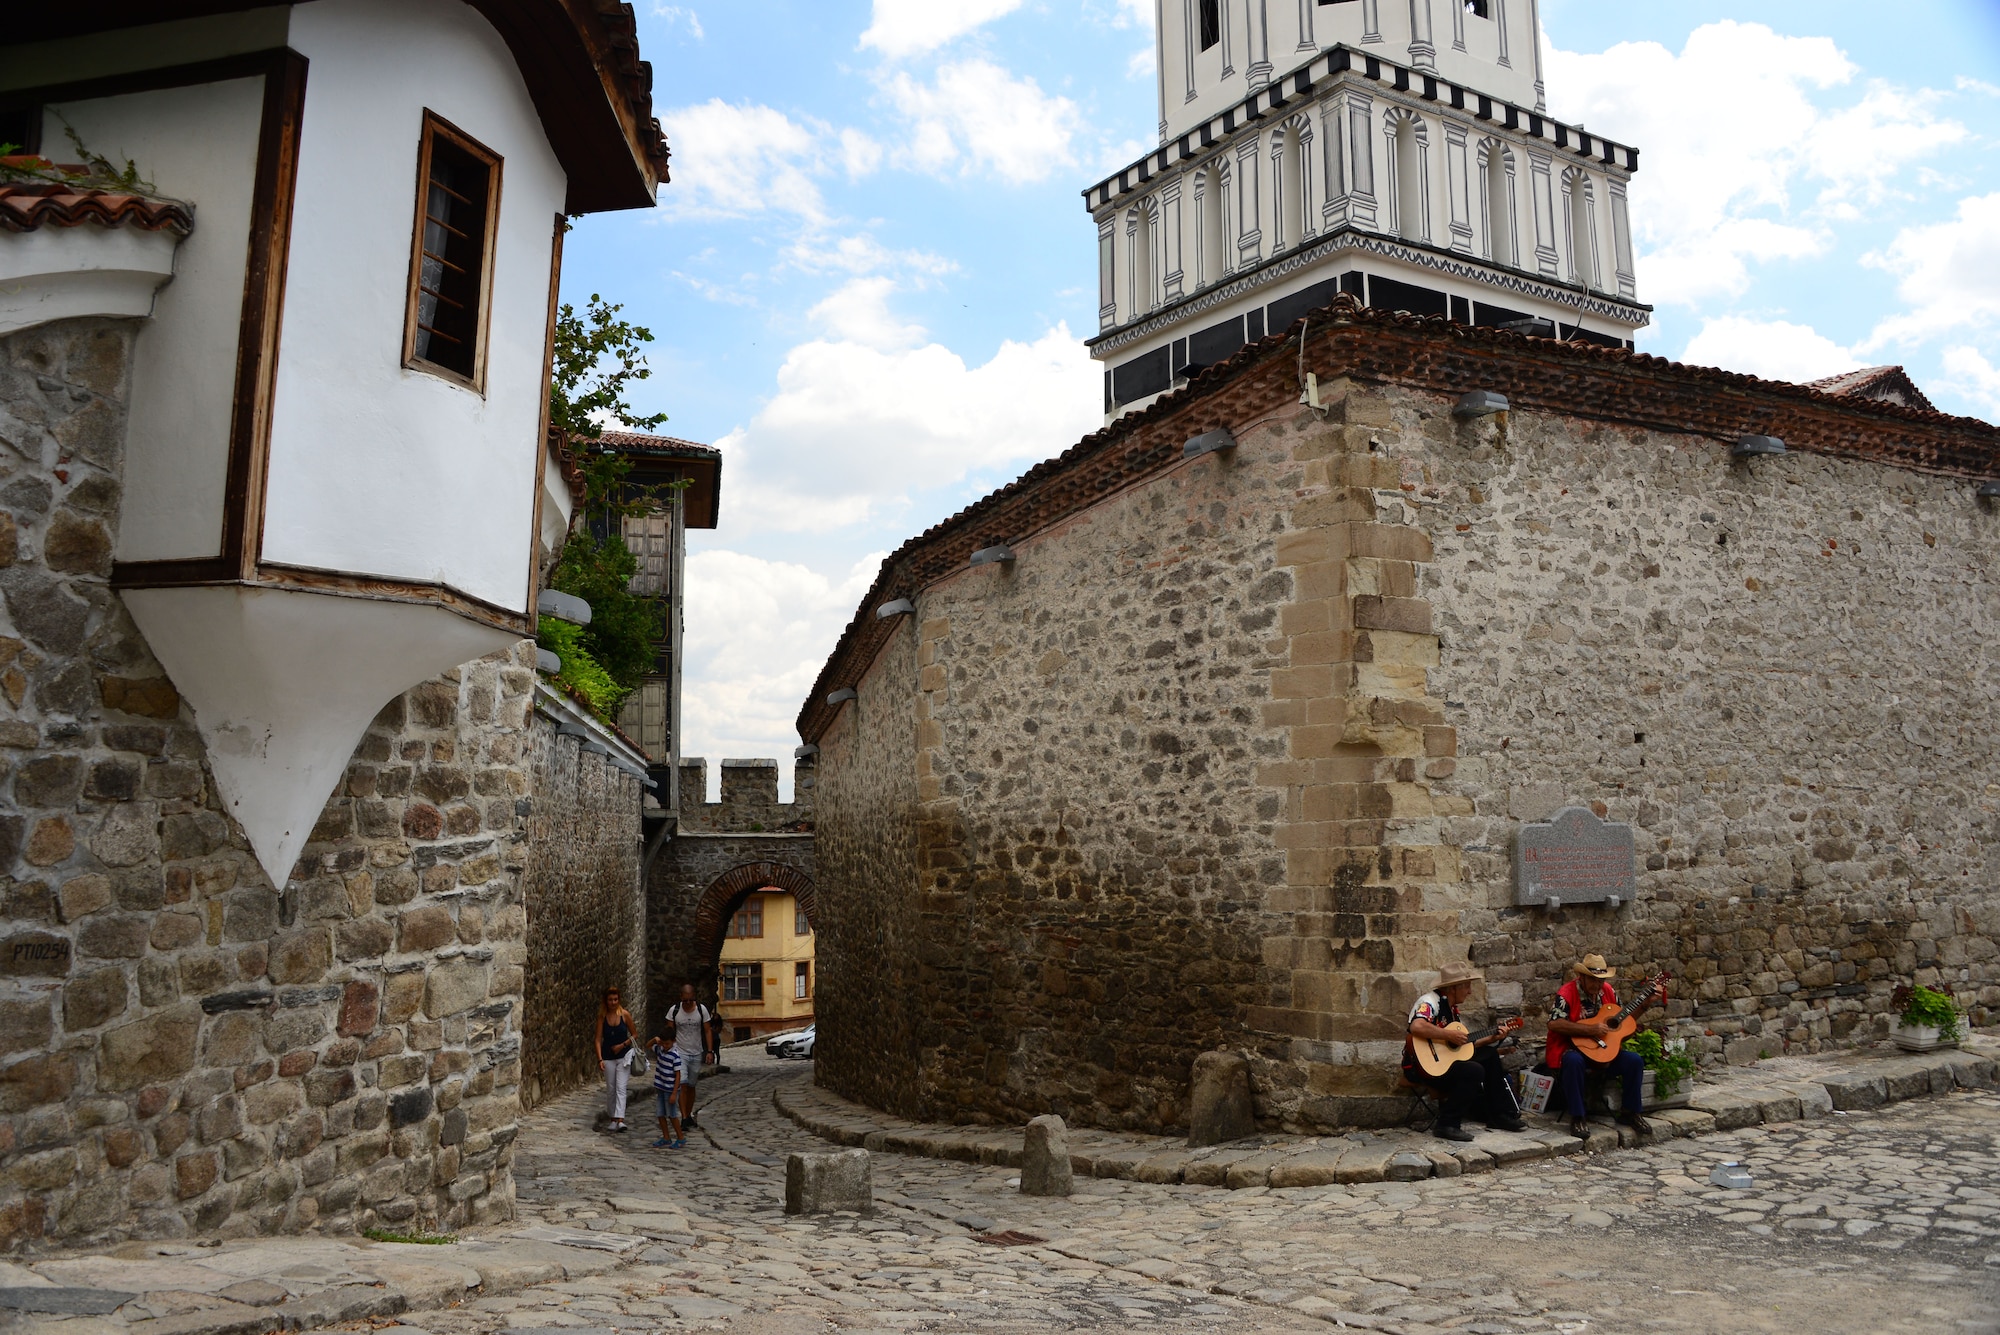 Street musicians play tunes for passerby's on the cobblestone streets of Plovdiv, Bulgaria.  Tennessee National Guard Soldiers and Airmen enjoyed a Morale Wellness and Recreation visit to Plovdiv on Aug.13, 2016 while they were deployed to Novo Selo Training Area, Bulgaria to participate in Humanitarian Civic Assistance projects.    (U.S. Air National Guard photo by Master Sgt. Kendra M. Owenby, 134 ARW Public Affairs)